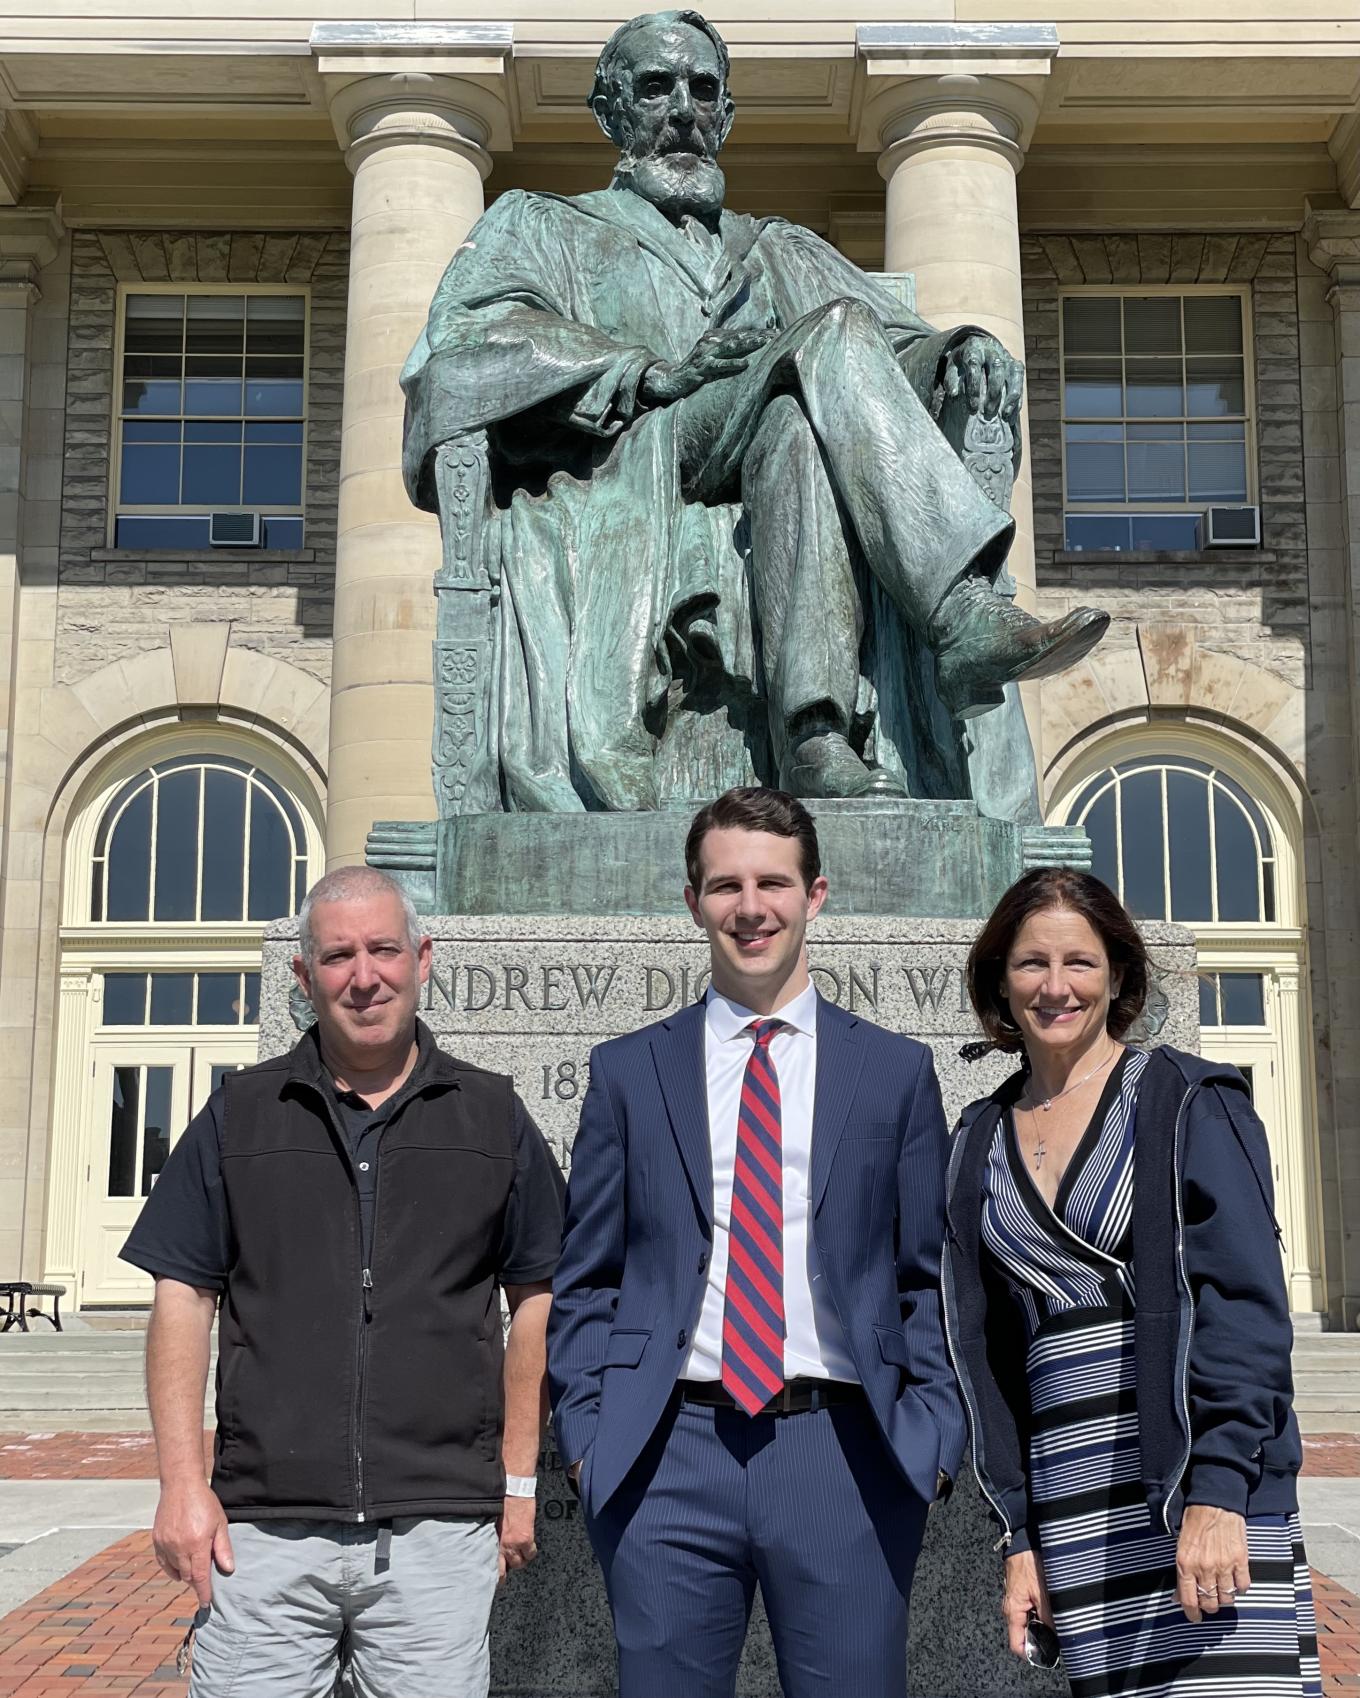 Stu Speckman '86, Drew Speckman '20 and Alicia Kennedy in front of the Ezra Cornell statue on Cornell's Ithaca campus